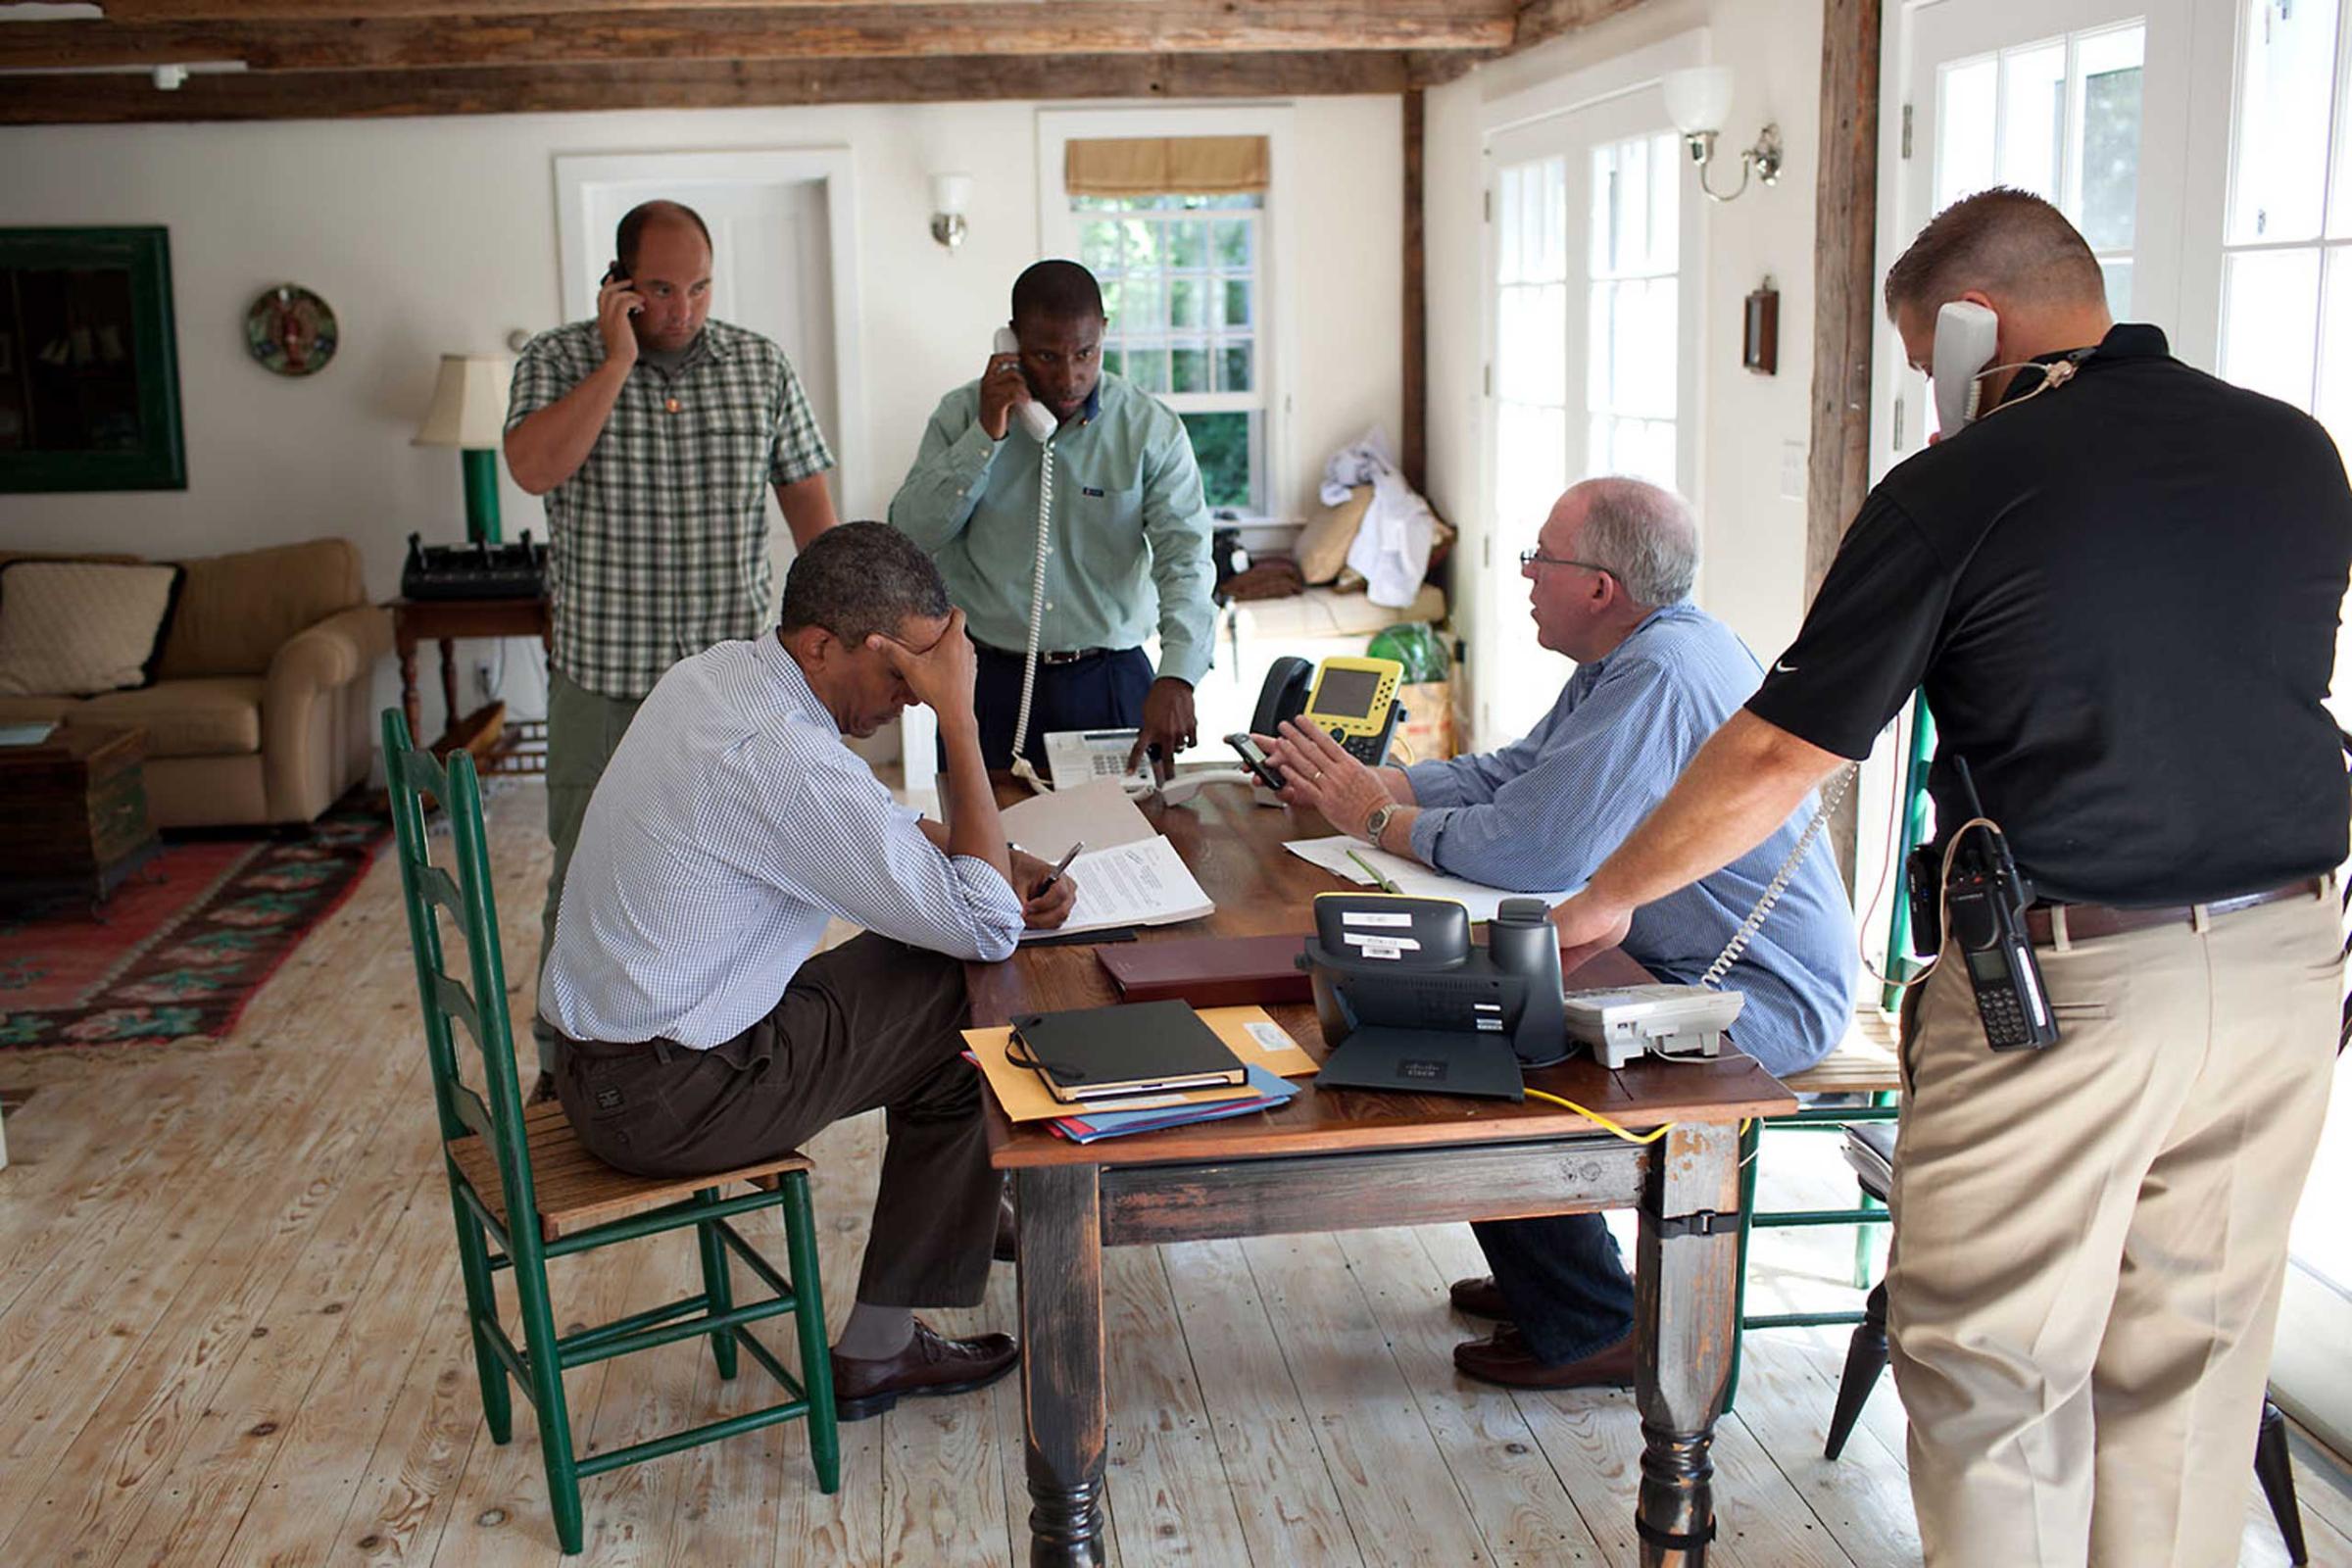 "A former President once said, 'Presidents don't get vacations, they just get a change of scenery.' We were on 'vacation' in Martha's Vineyard and the President was monitoring Hurricane Irene with John Brennan, Assistant to the President for Homeland Security and Counterterrorism, at right in light blue shirt, on Aug. 26, 2011. They were waiting for a conference call on the hurricane with affected governors and mayors."